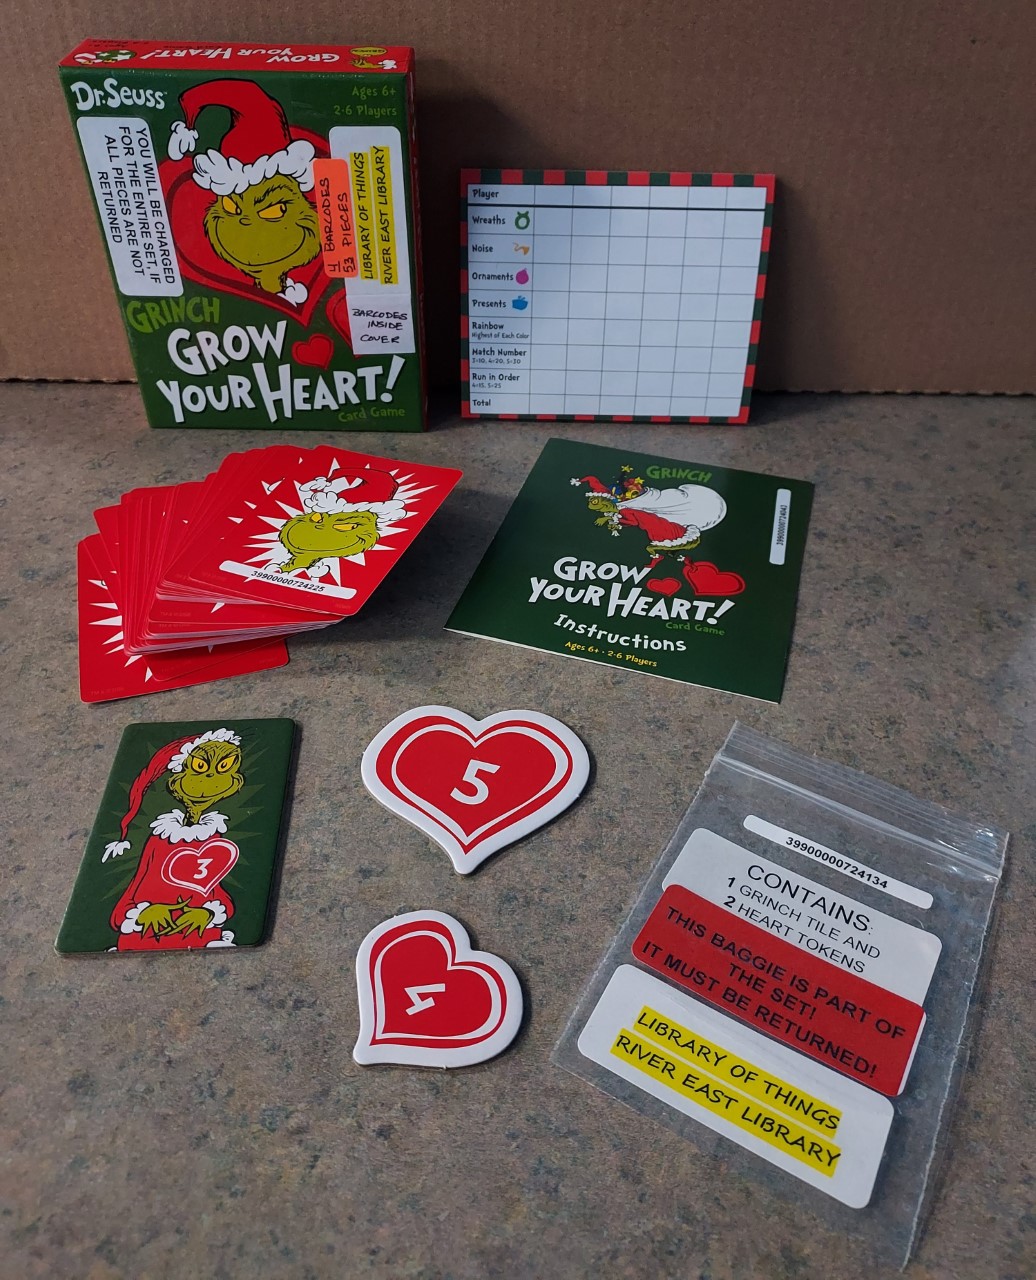 Game called the Grinch Grow Your Heart game